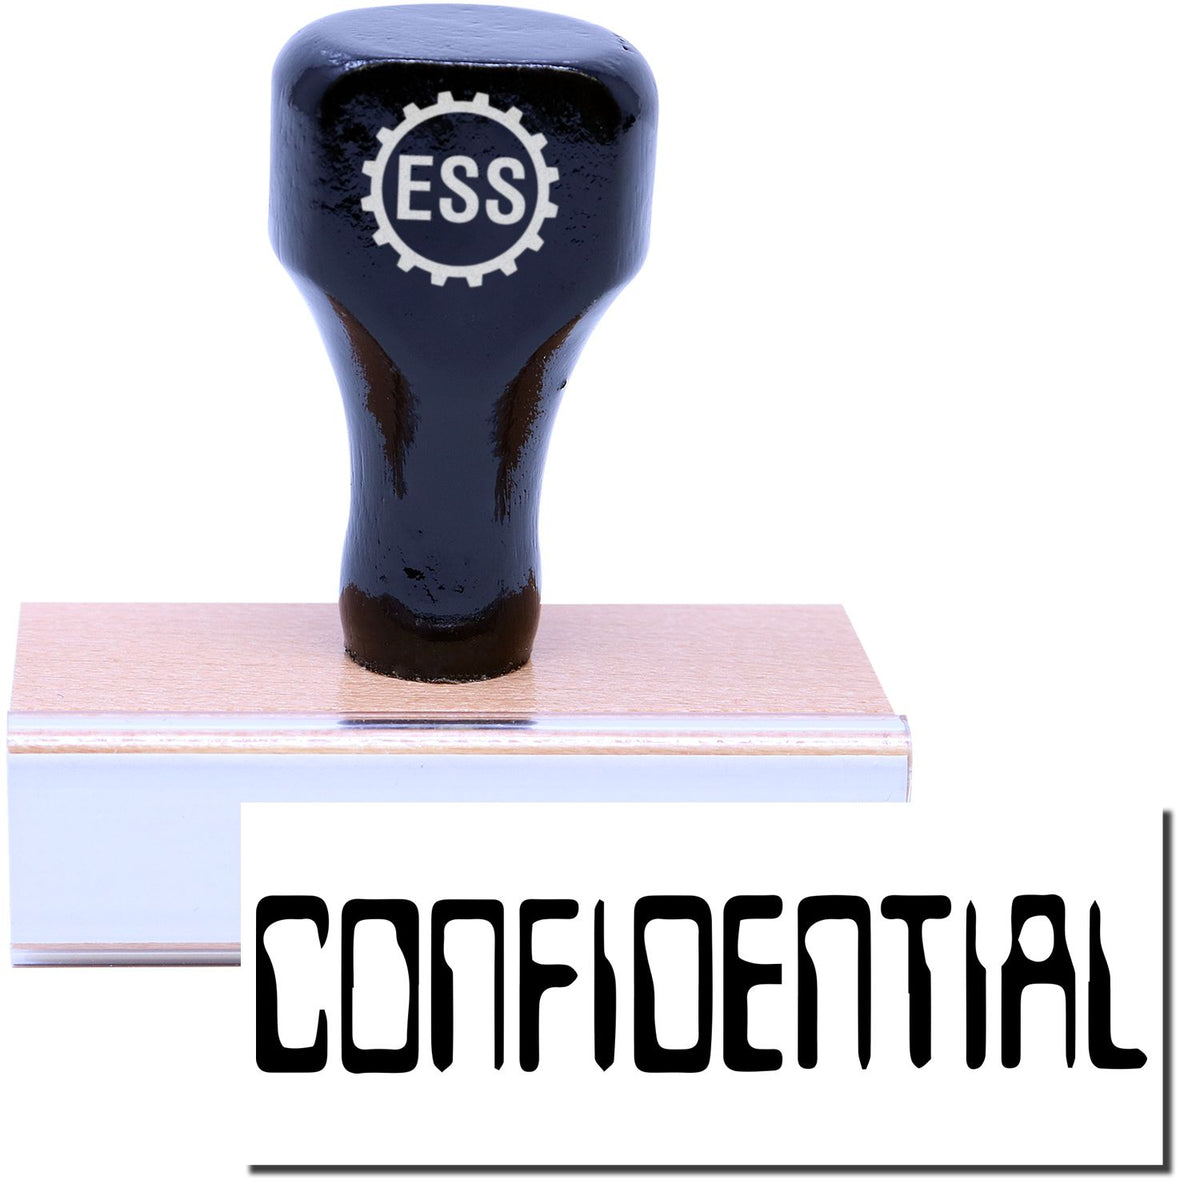 A stock office rubber stamp with a stamped image showing how the text &quot;CONFIDENTIAL&quot; in a barcode font is displayed after stamping.